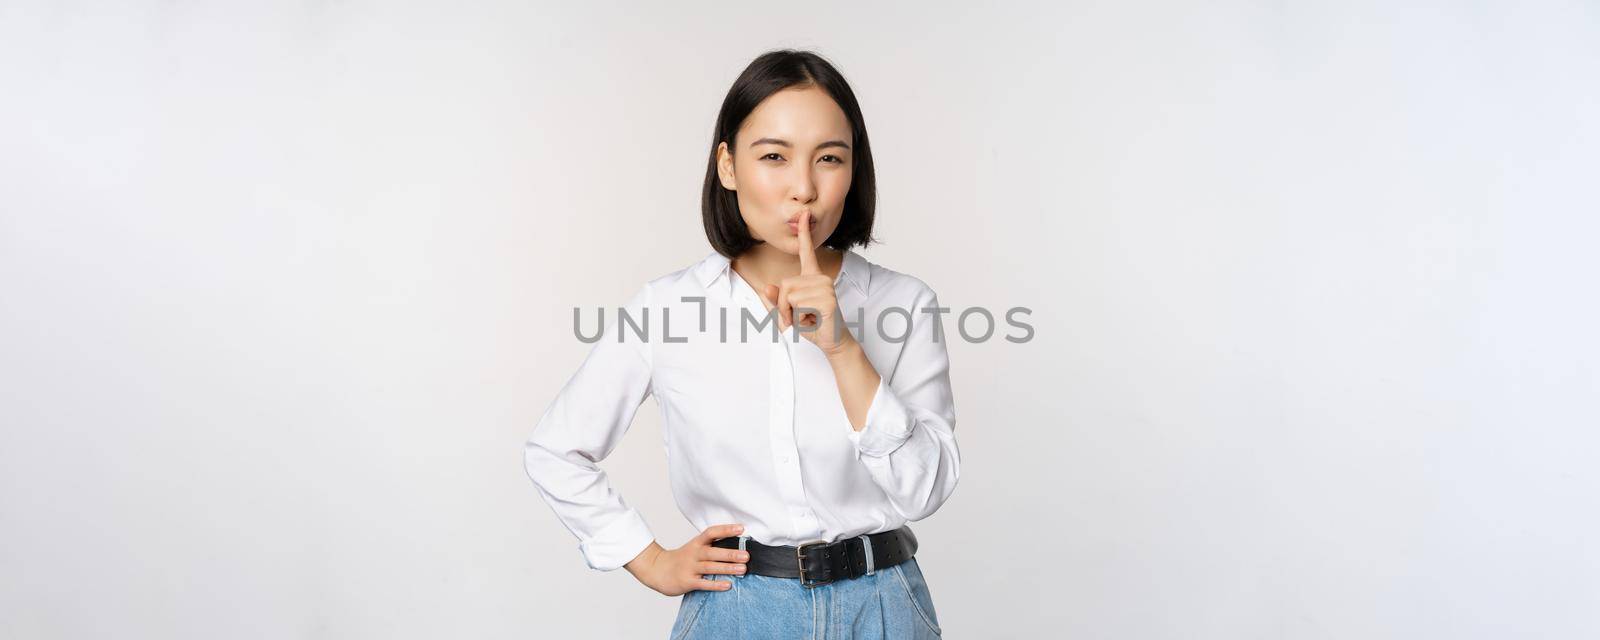 Portrait of young asian adult woman shushing, say hush shh, press finger to lips, sharing secret, dont speak taboo gesture, standing over white background.